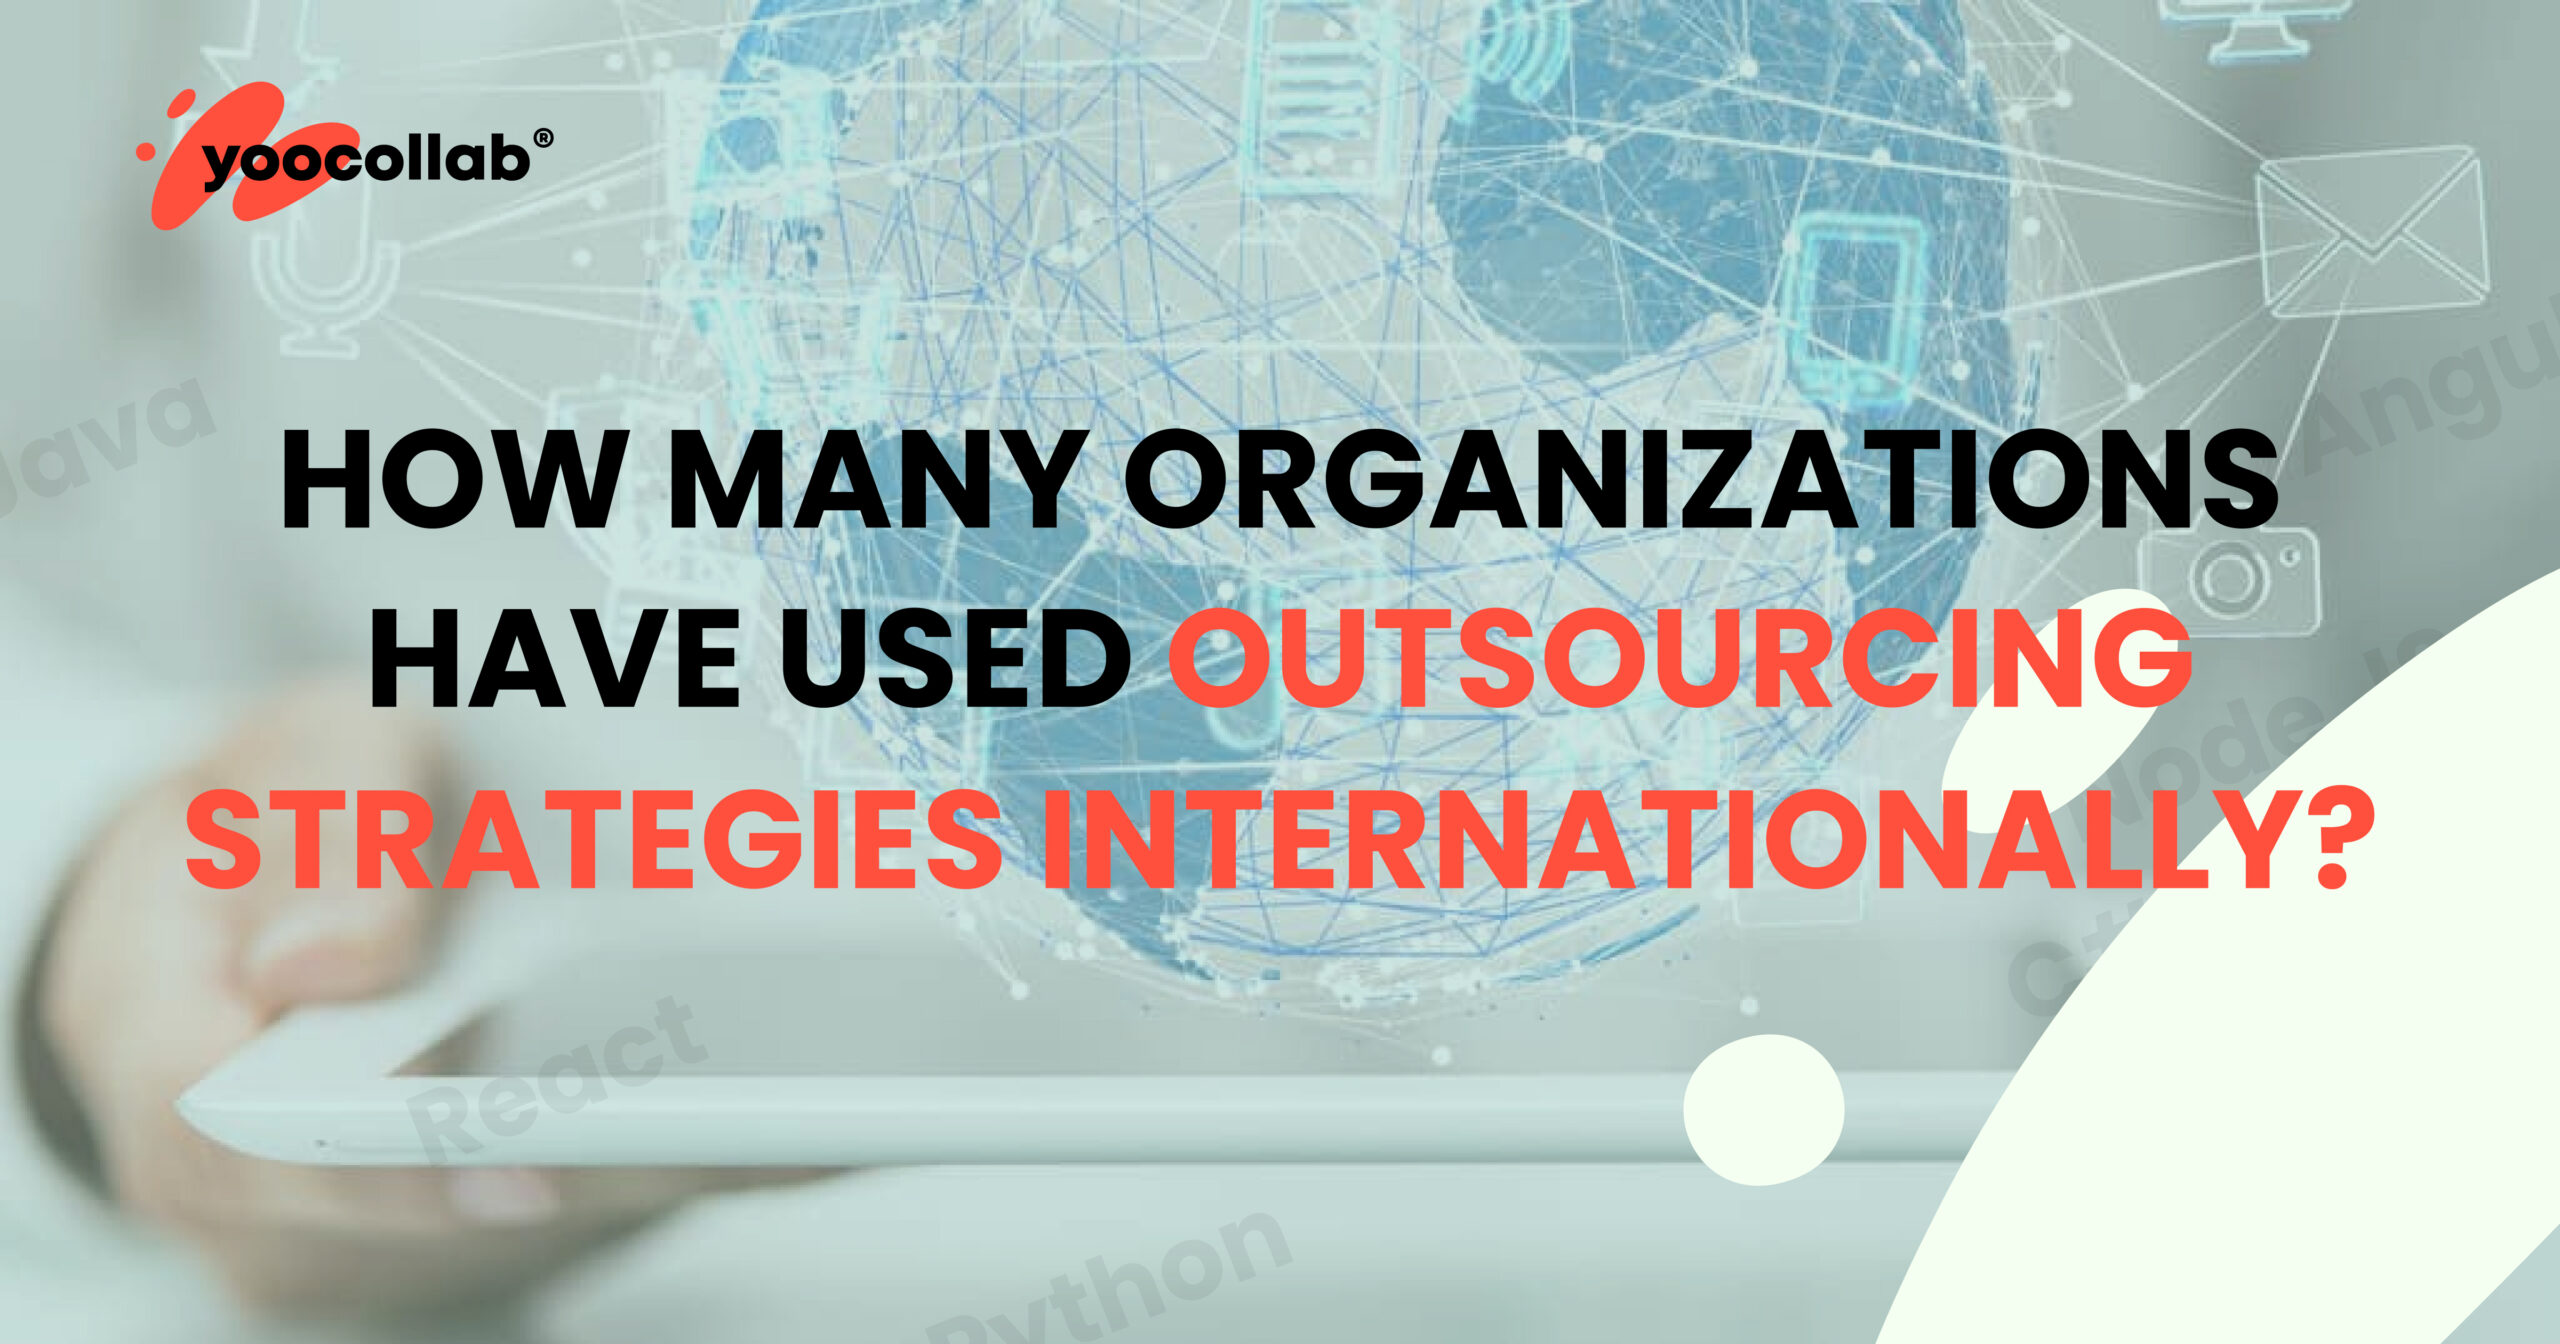 organizations have used outsourcing strategies internationally